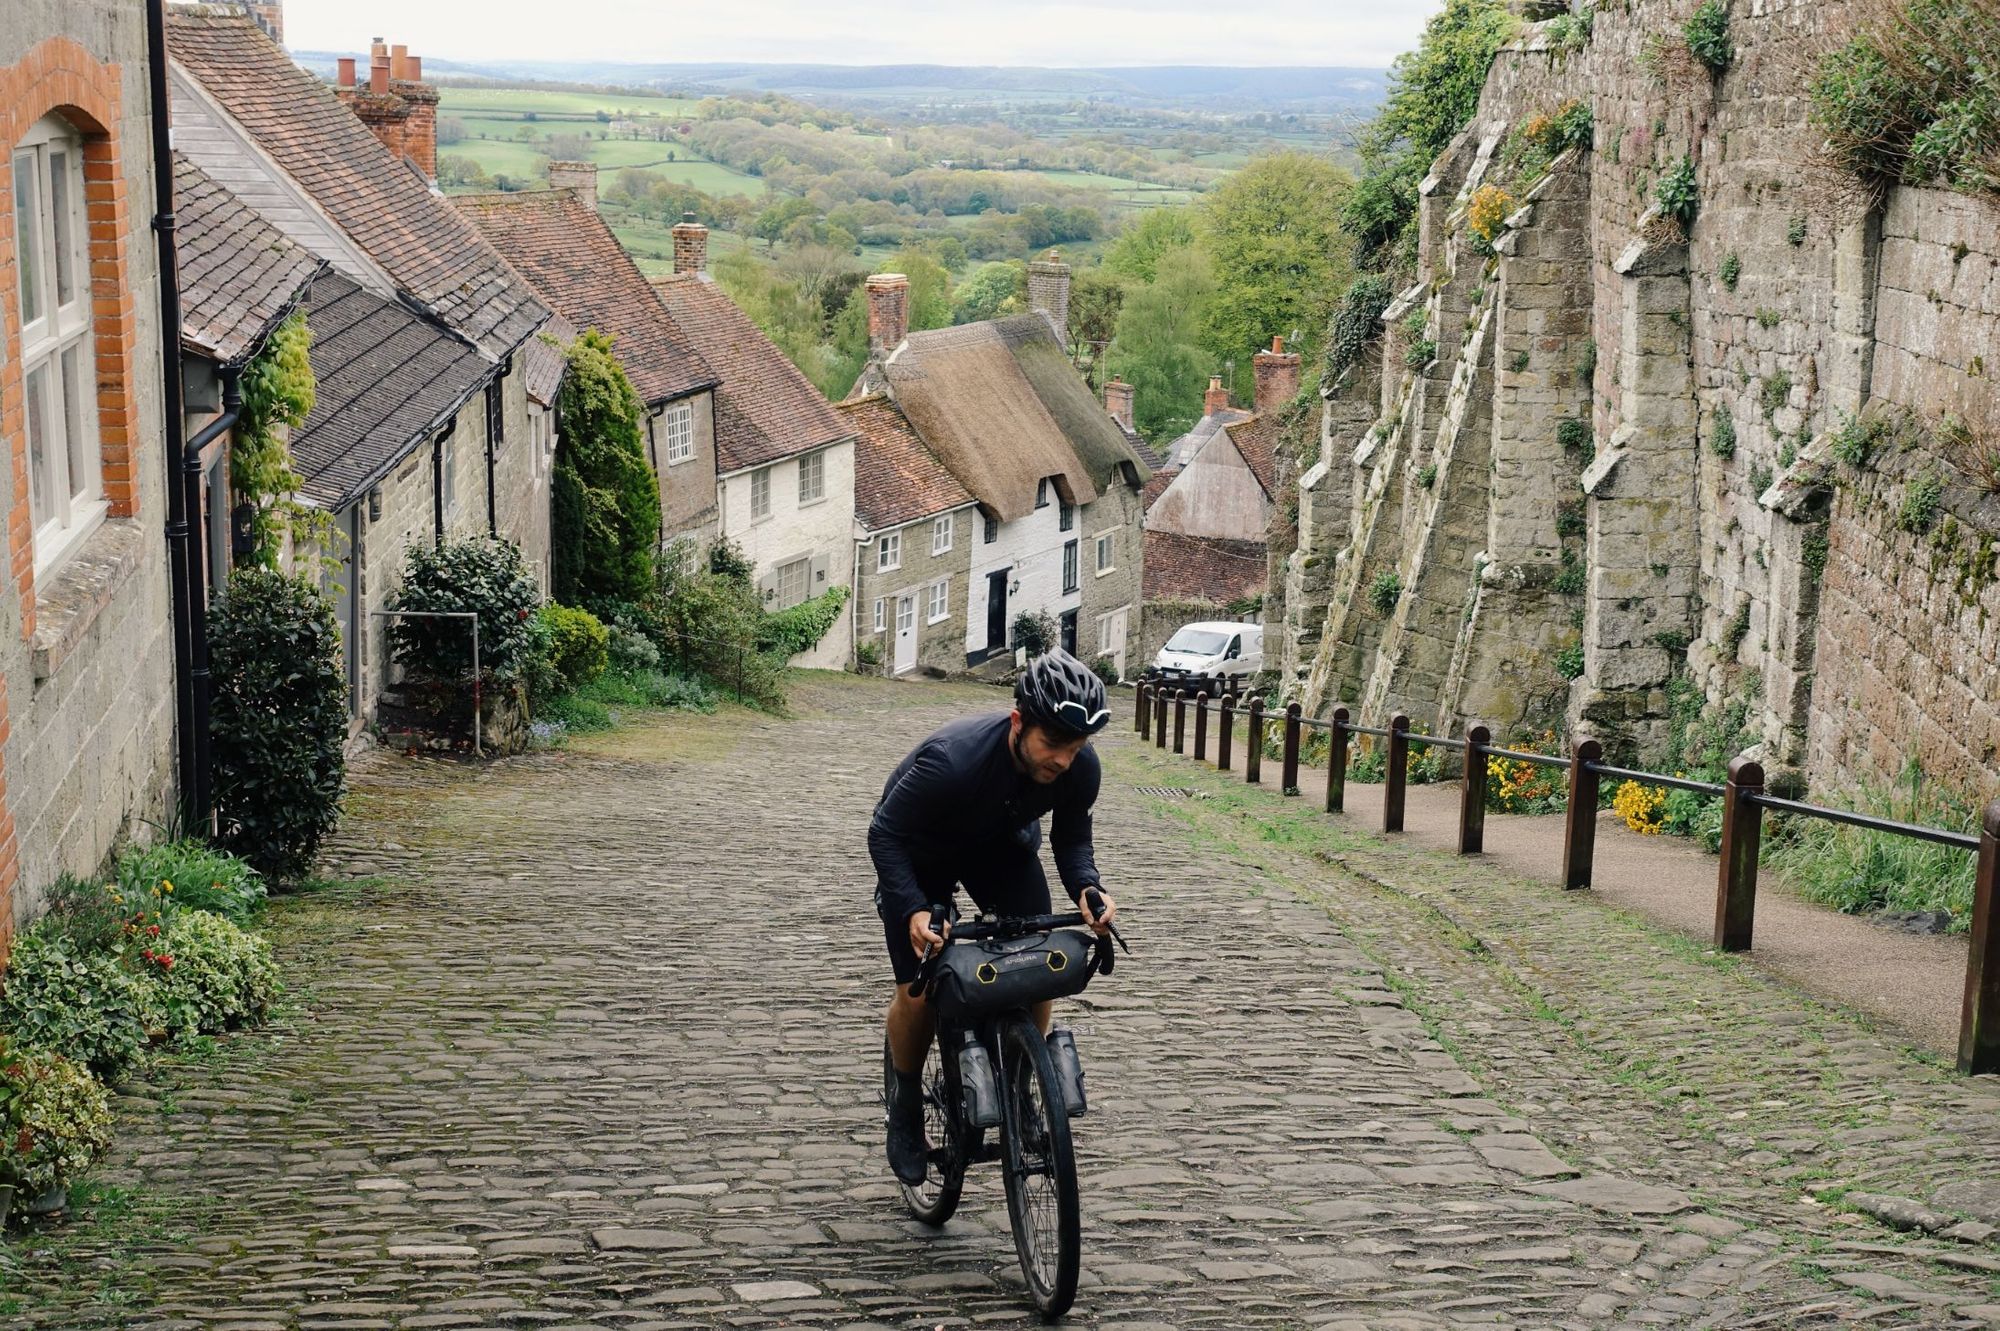 The 575km Bikepacking Route Across Britain’s Oldest Highway